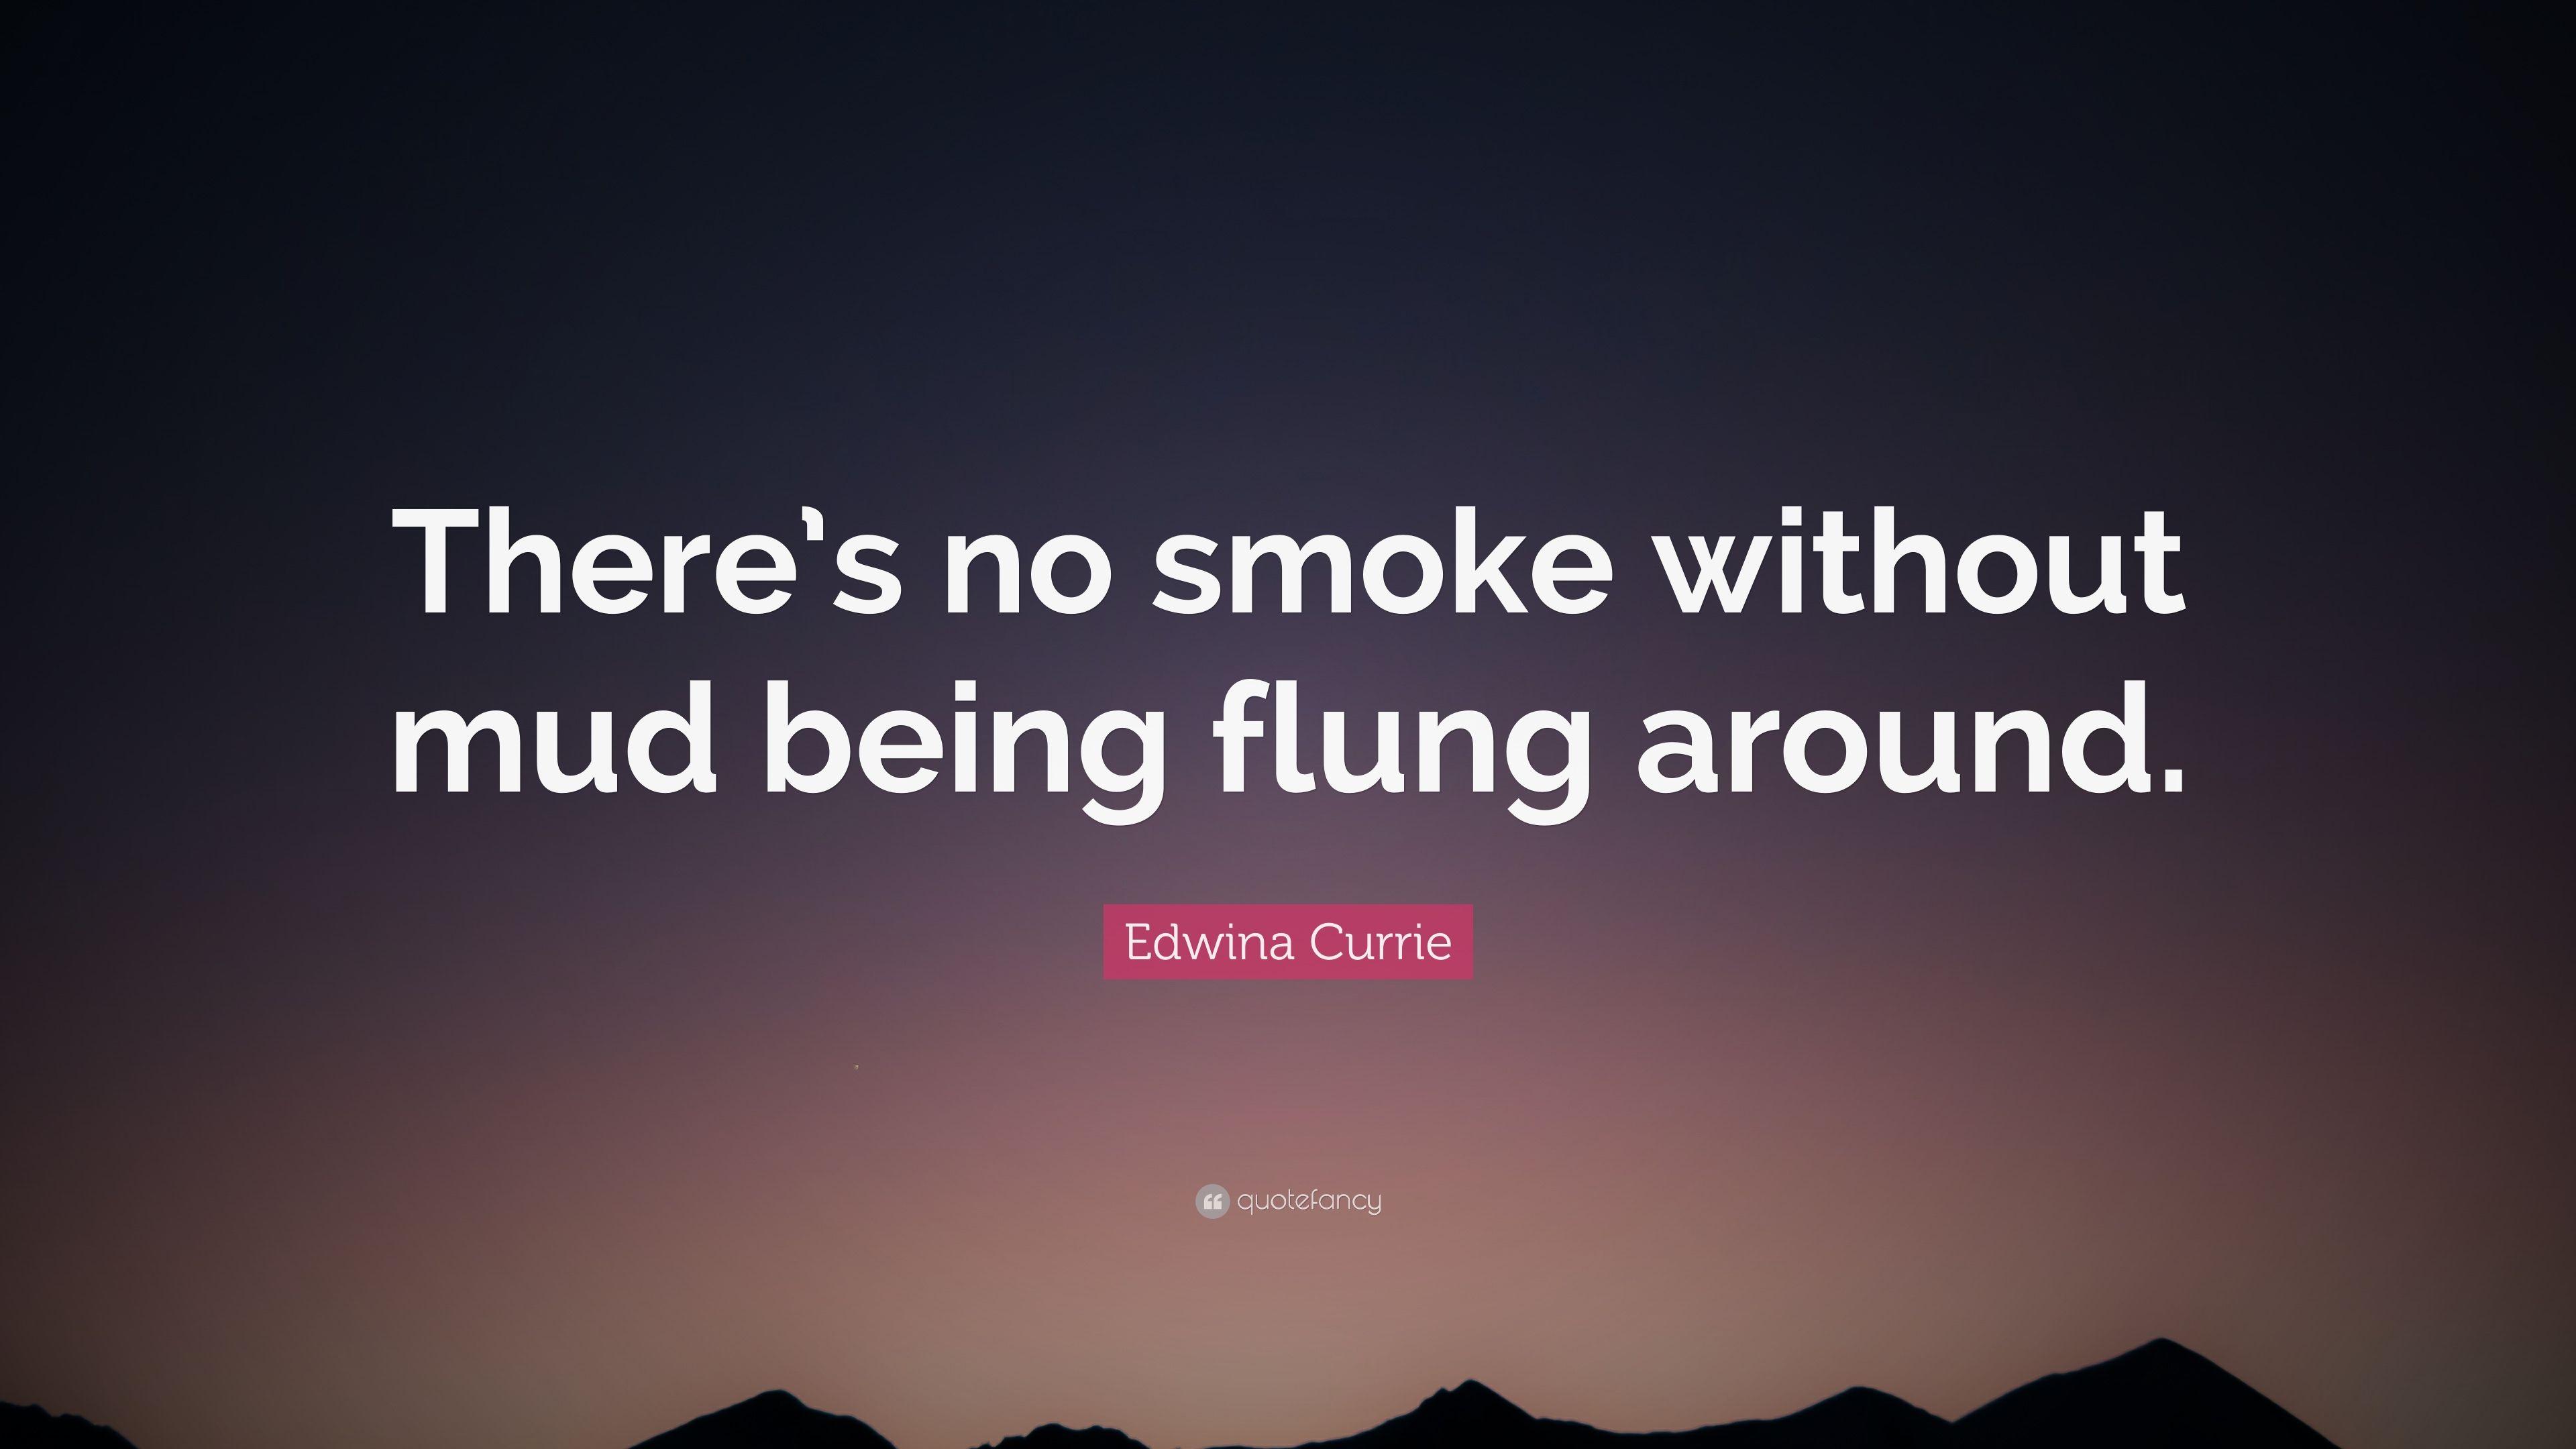 Edwina Currie Quote: “There's no smoke without mud being flung